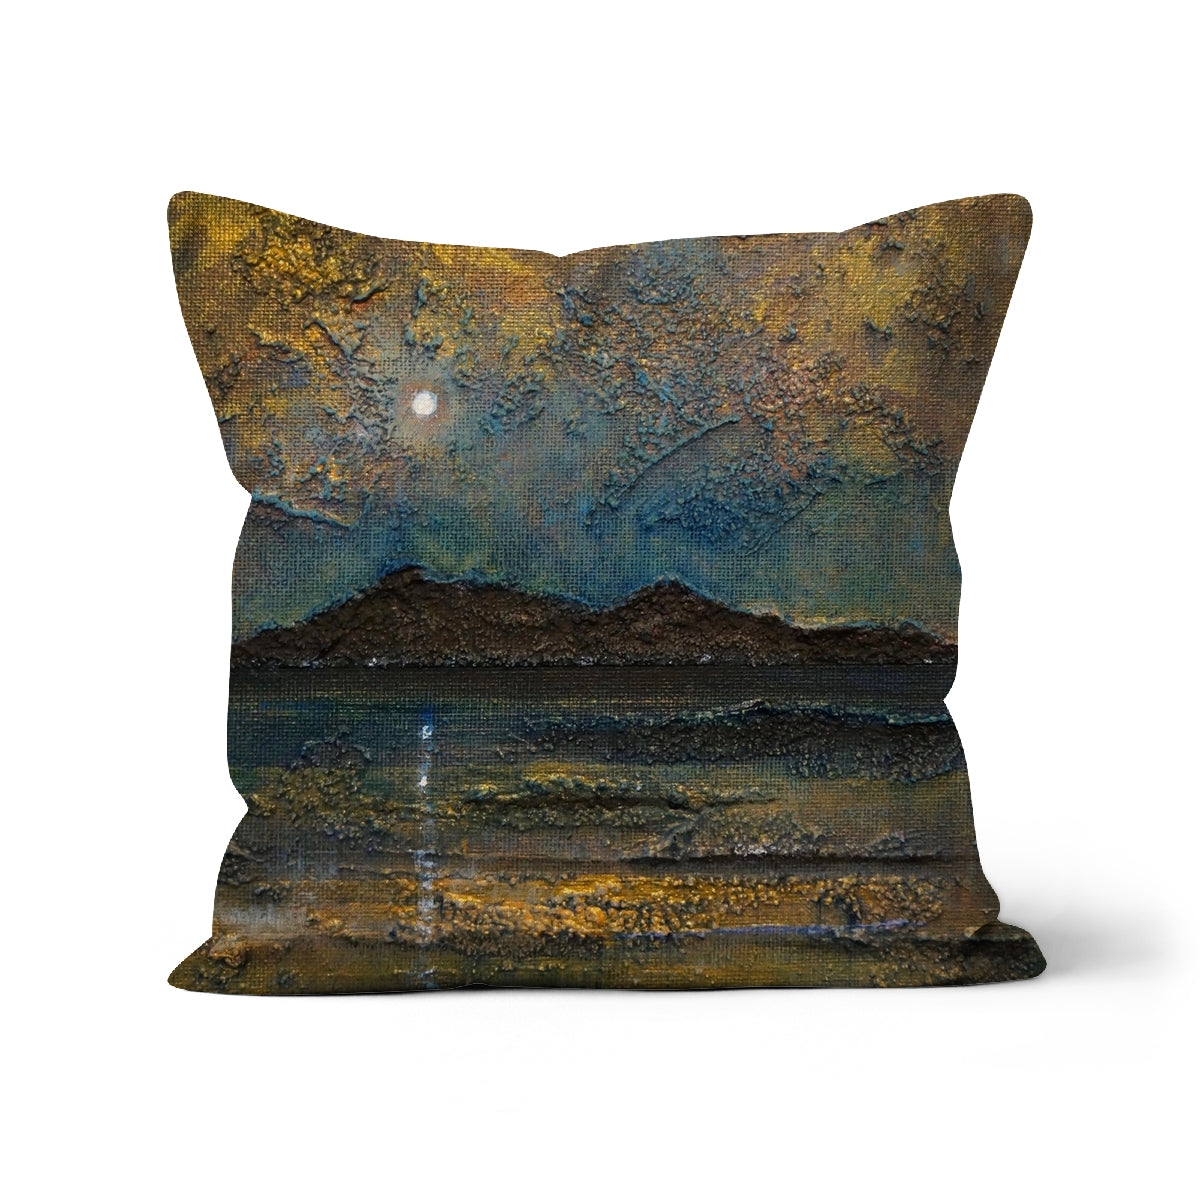 Arran Moonlight Art Gifts Cushion-Cushions-Arran Art Gallery-Faux Suede-12"x12"-Paintings, Prints, Homeware, Art Gifts From Scotland By Scottish Artist Kevin Hunter